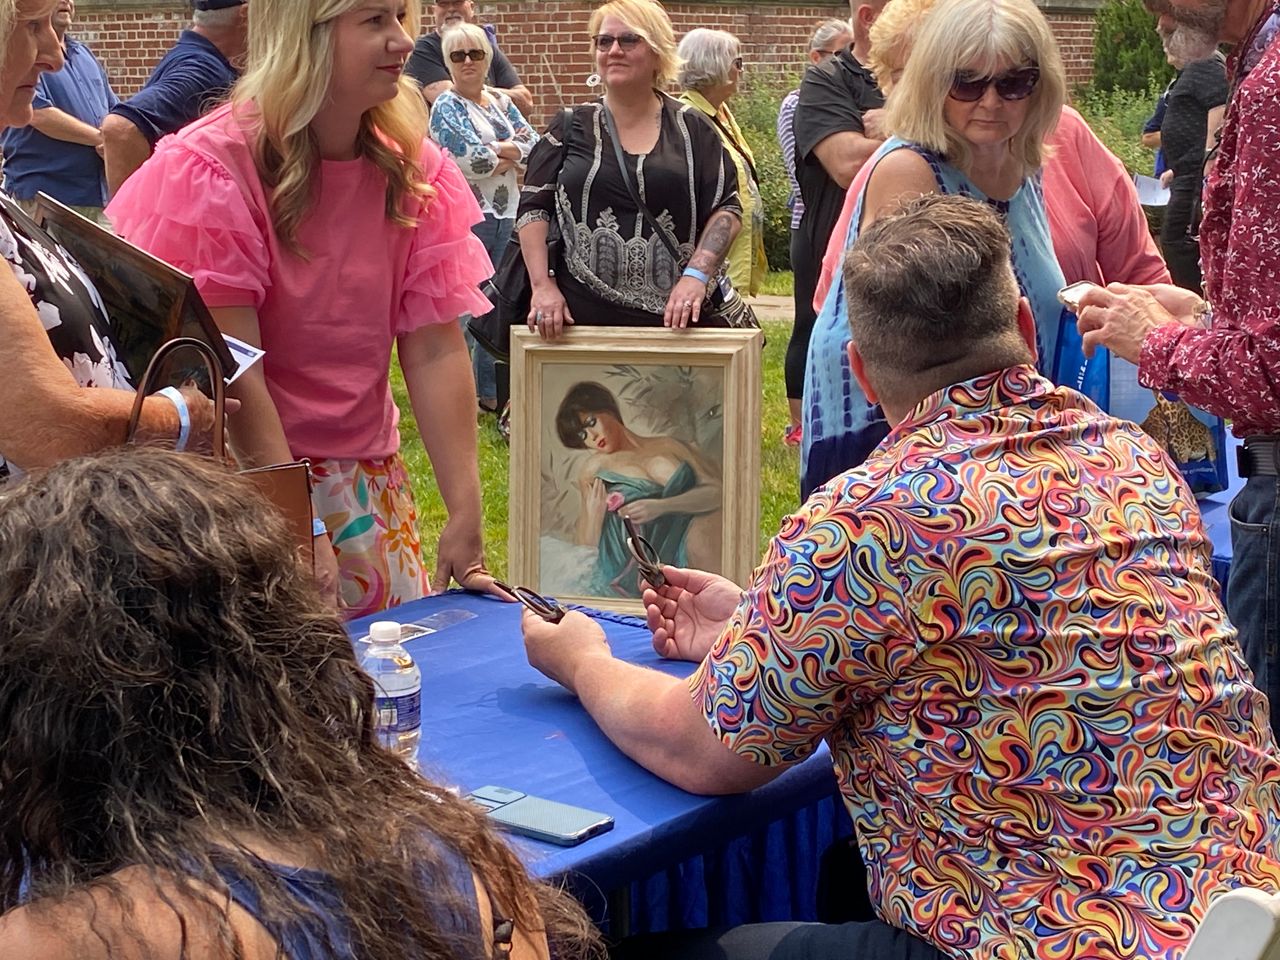 people gathered at tables, with one woman holding a painting